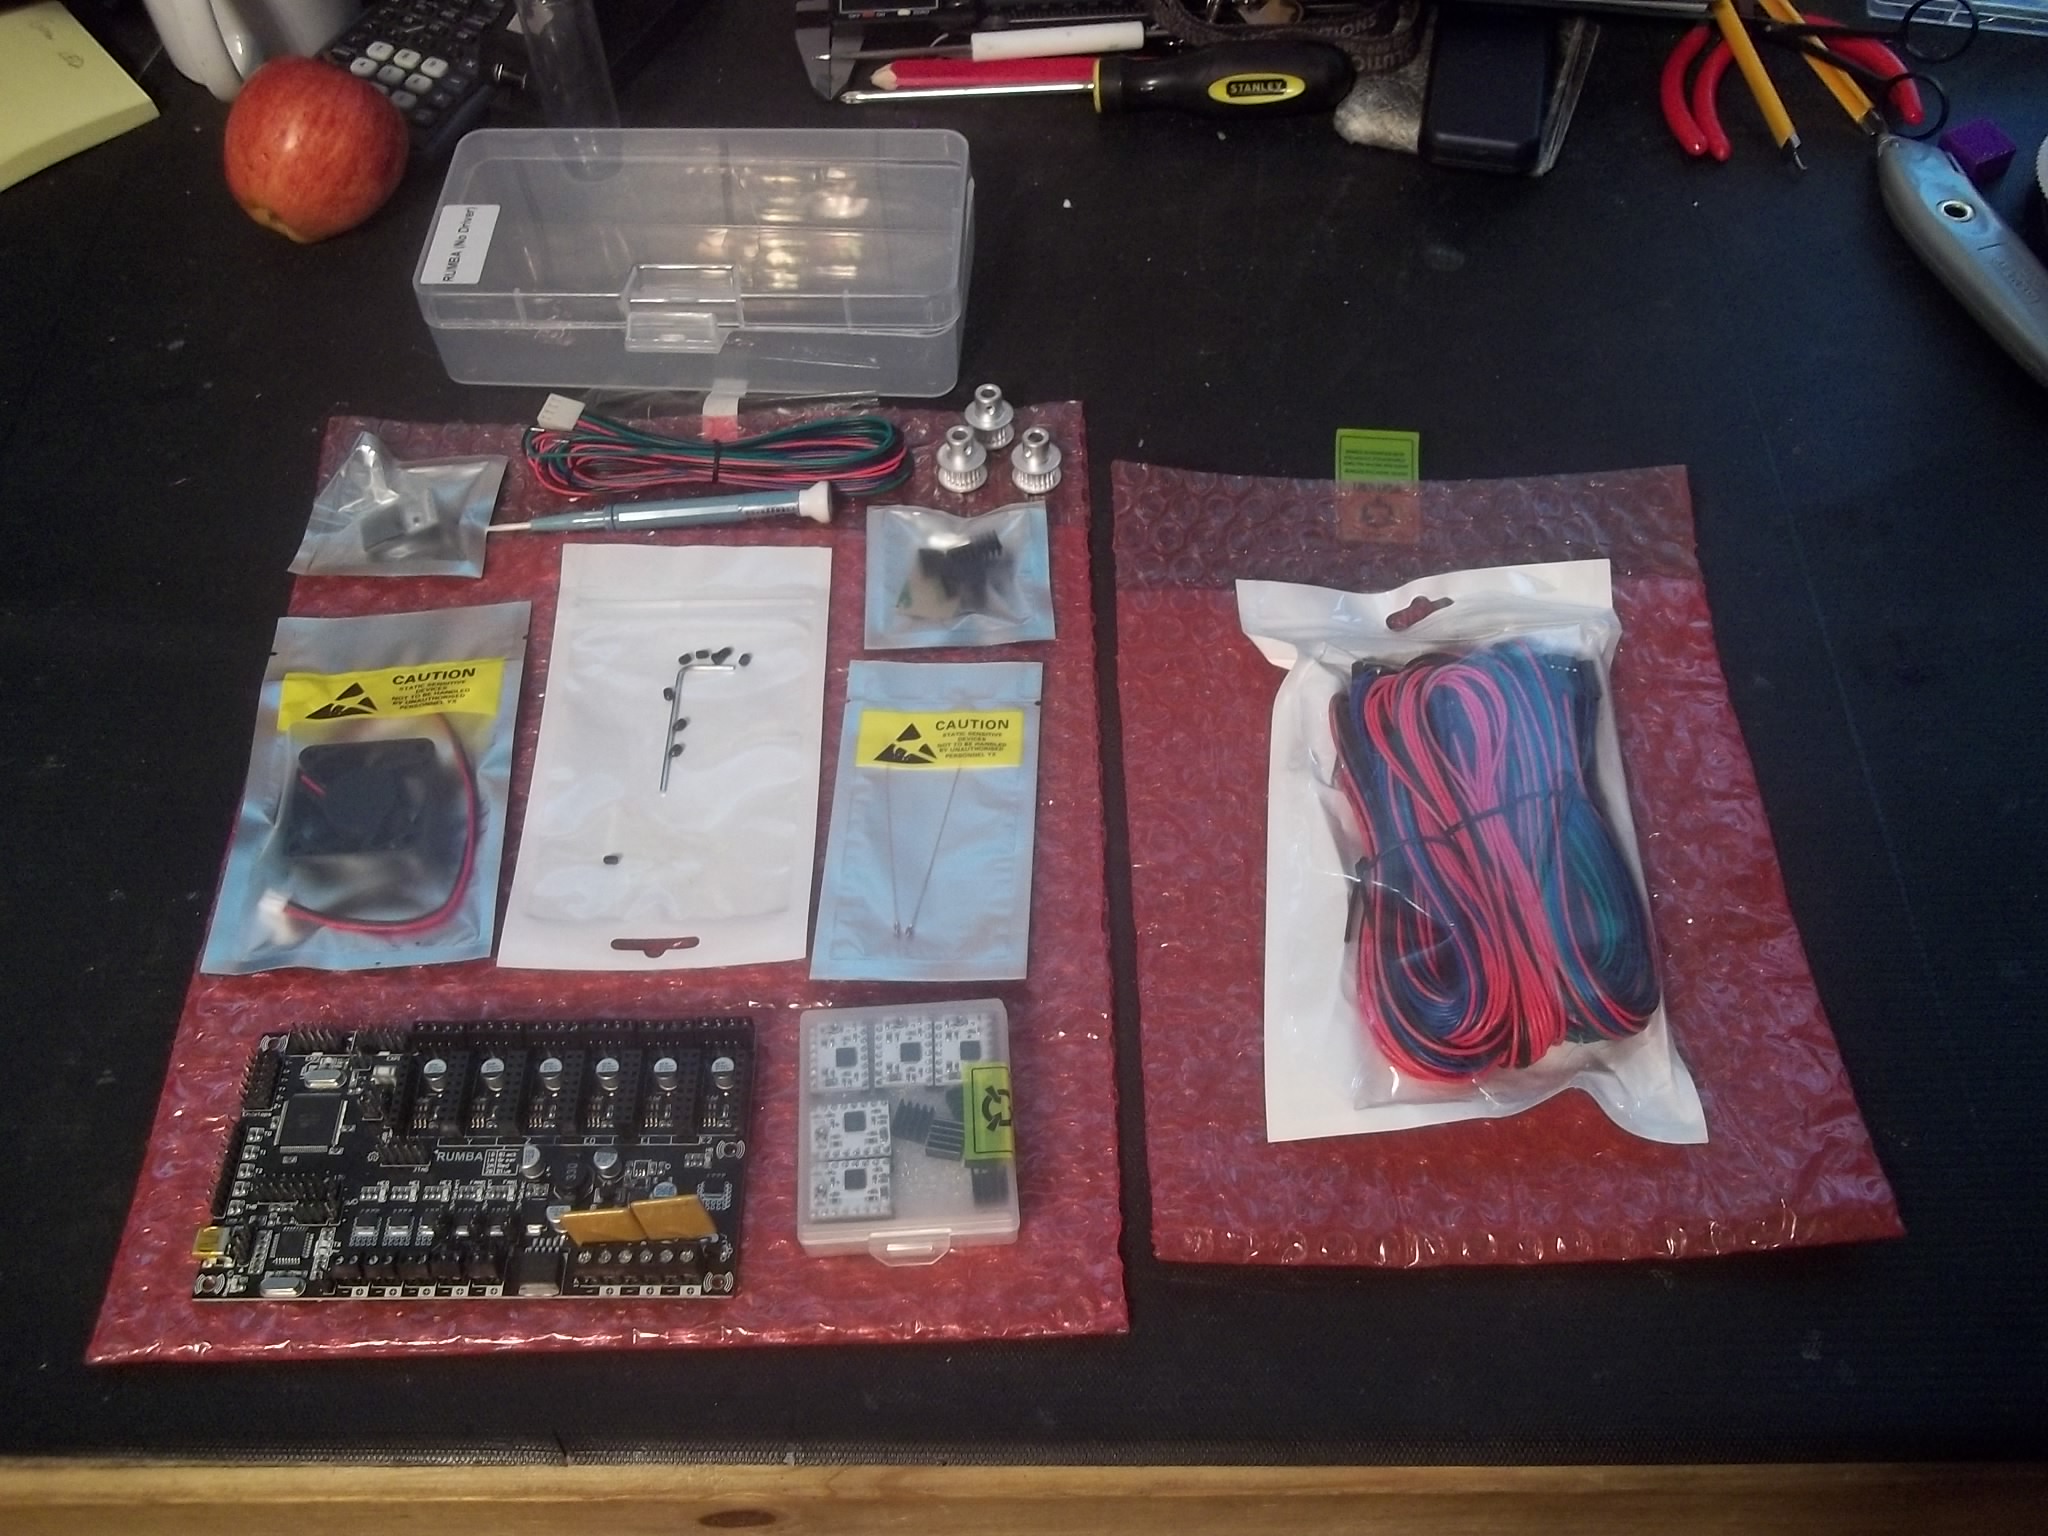 Prusa Mendel build update #2: all electronics acquired, miscellaneous hardware, updated sources and BOM